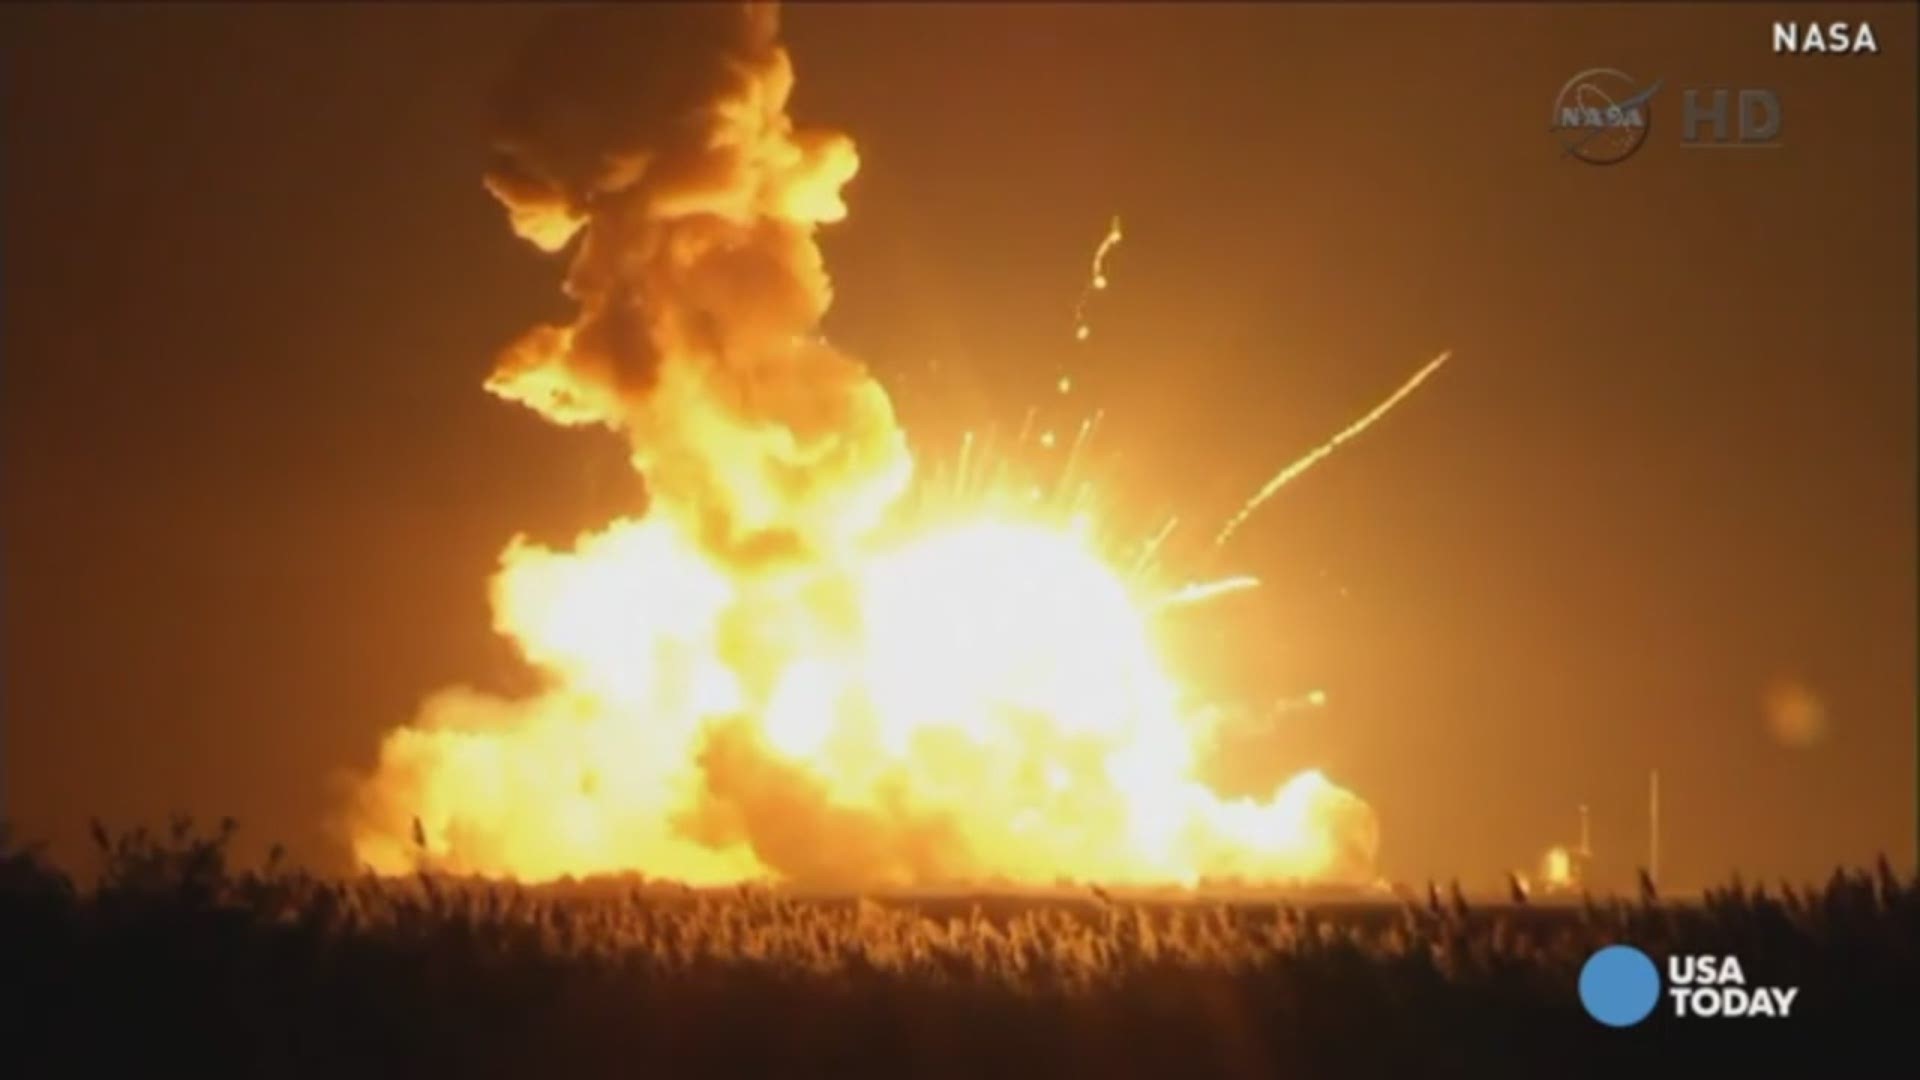 October 28, 2014: An Antares rocket carrying cargo destined for the International Space Station exploded and crashed back down to the launch pad just a few seconds after liftoff. No one was hurt and there was limited damage to Wallops Flight Facility.